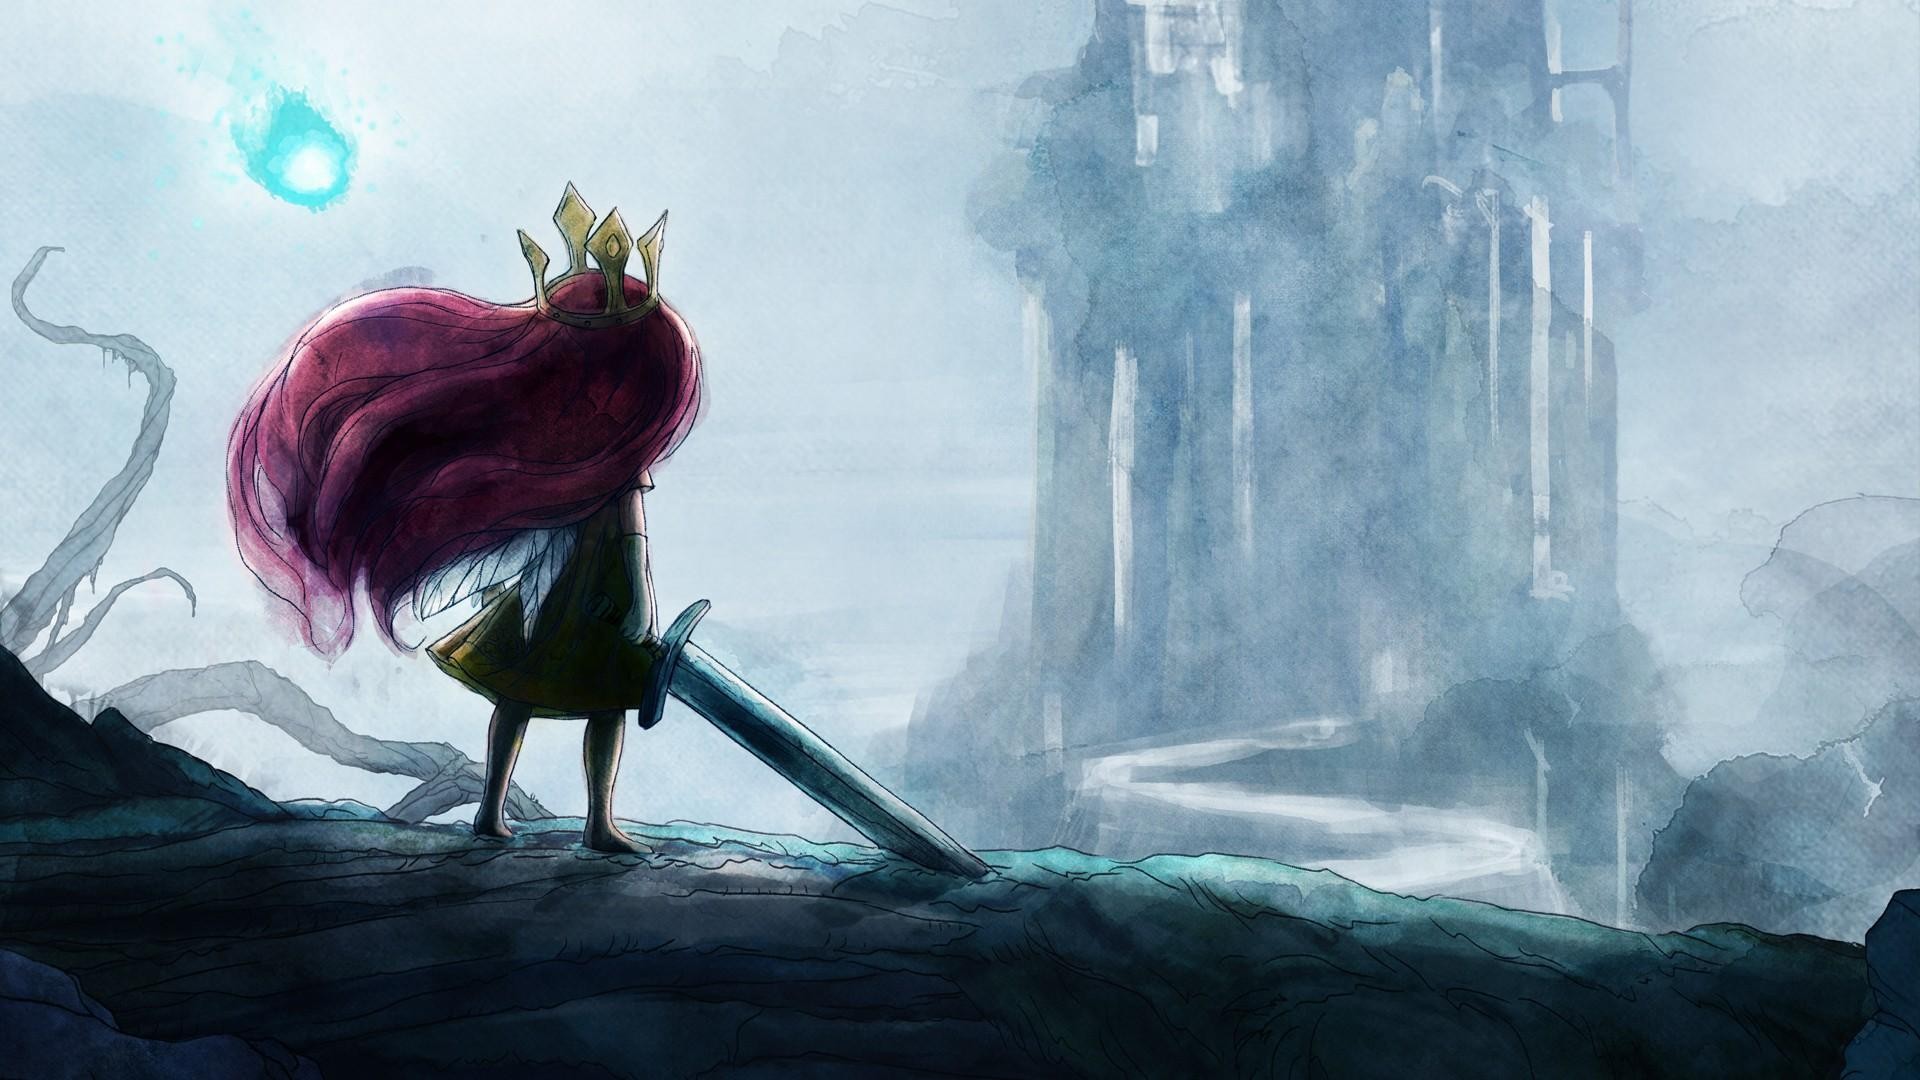 General 1920x1080 video games Child of Light video game art video game girls women with swords weapon crown fantasy art fantasy girl